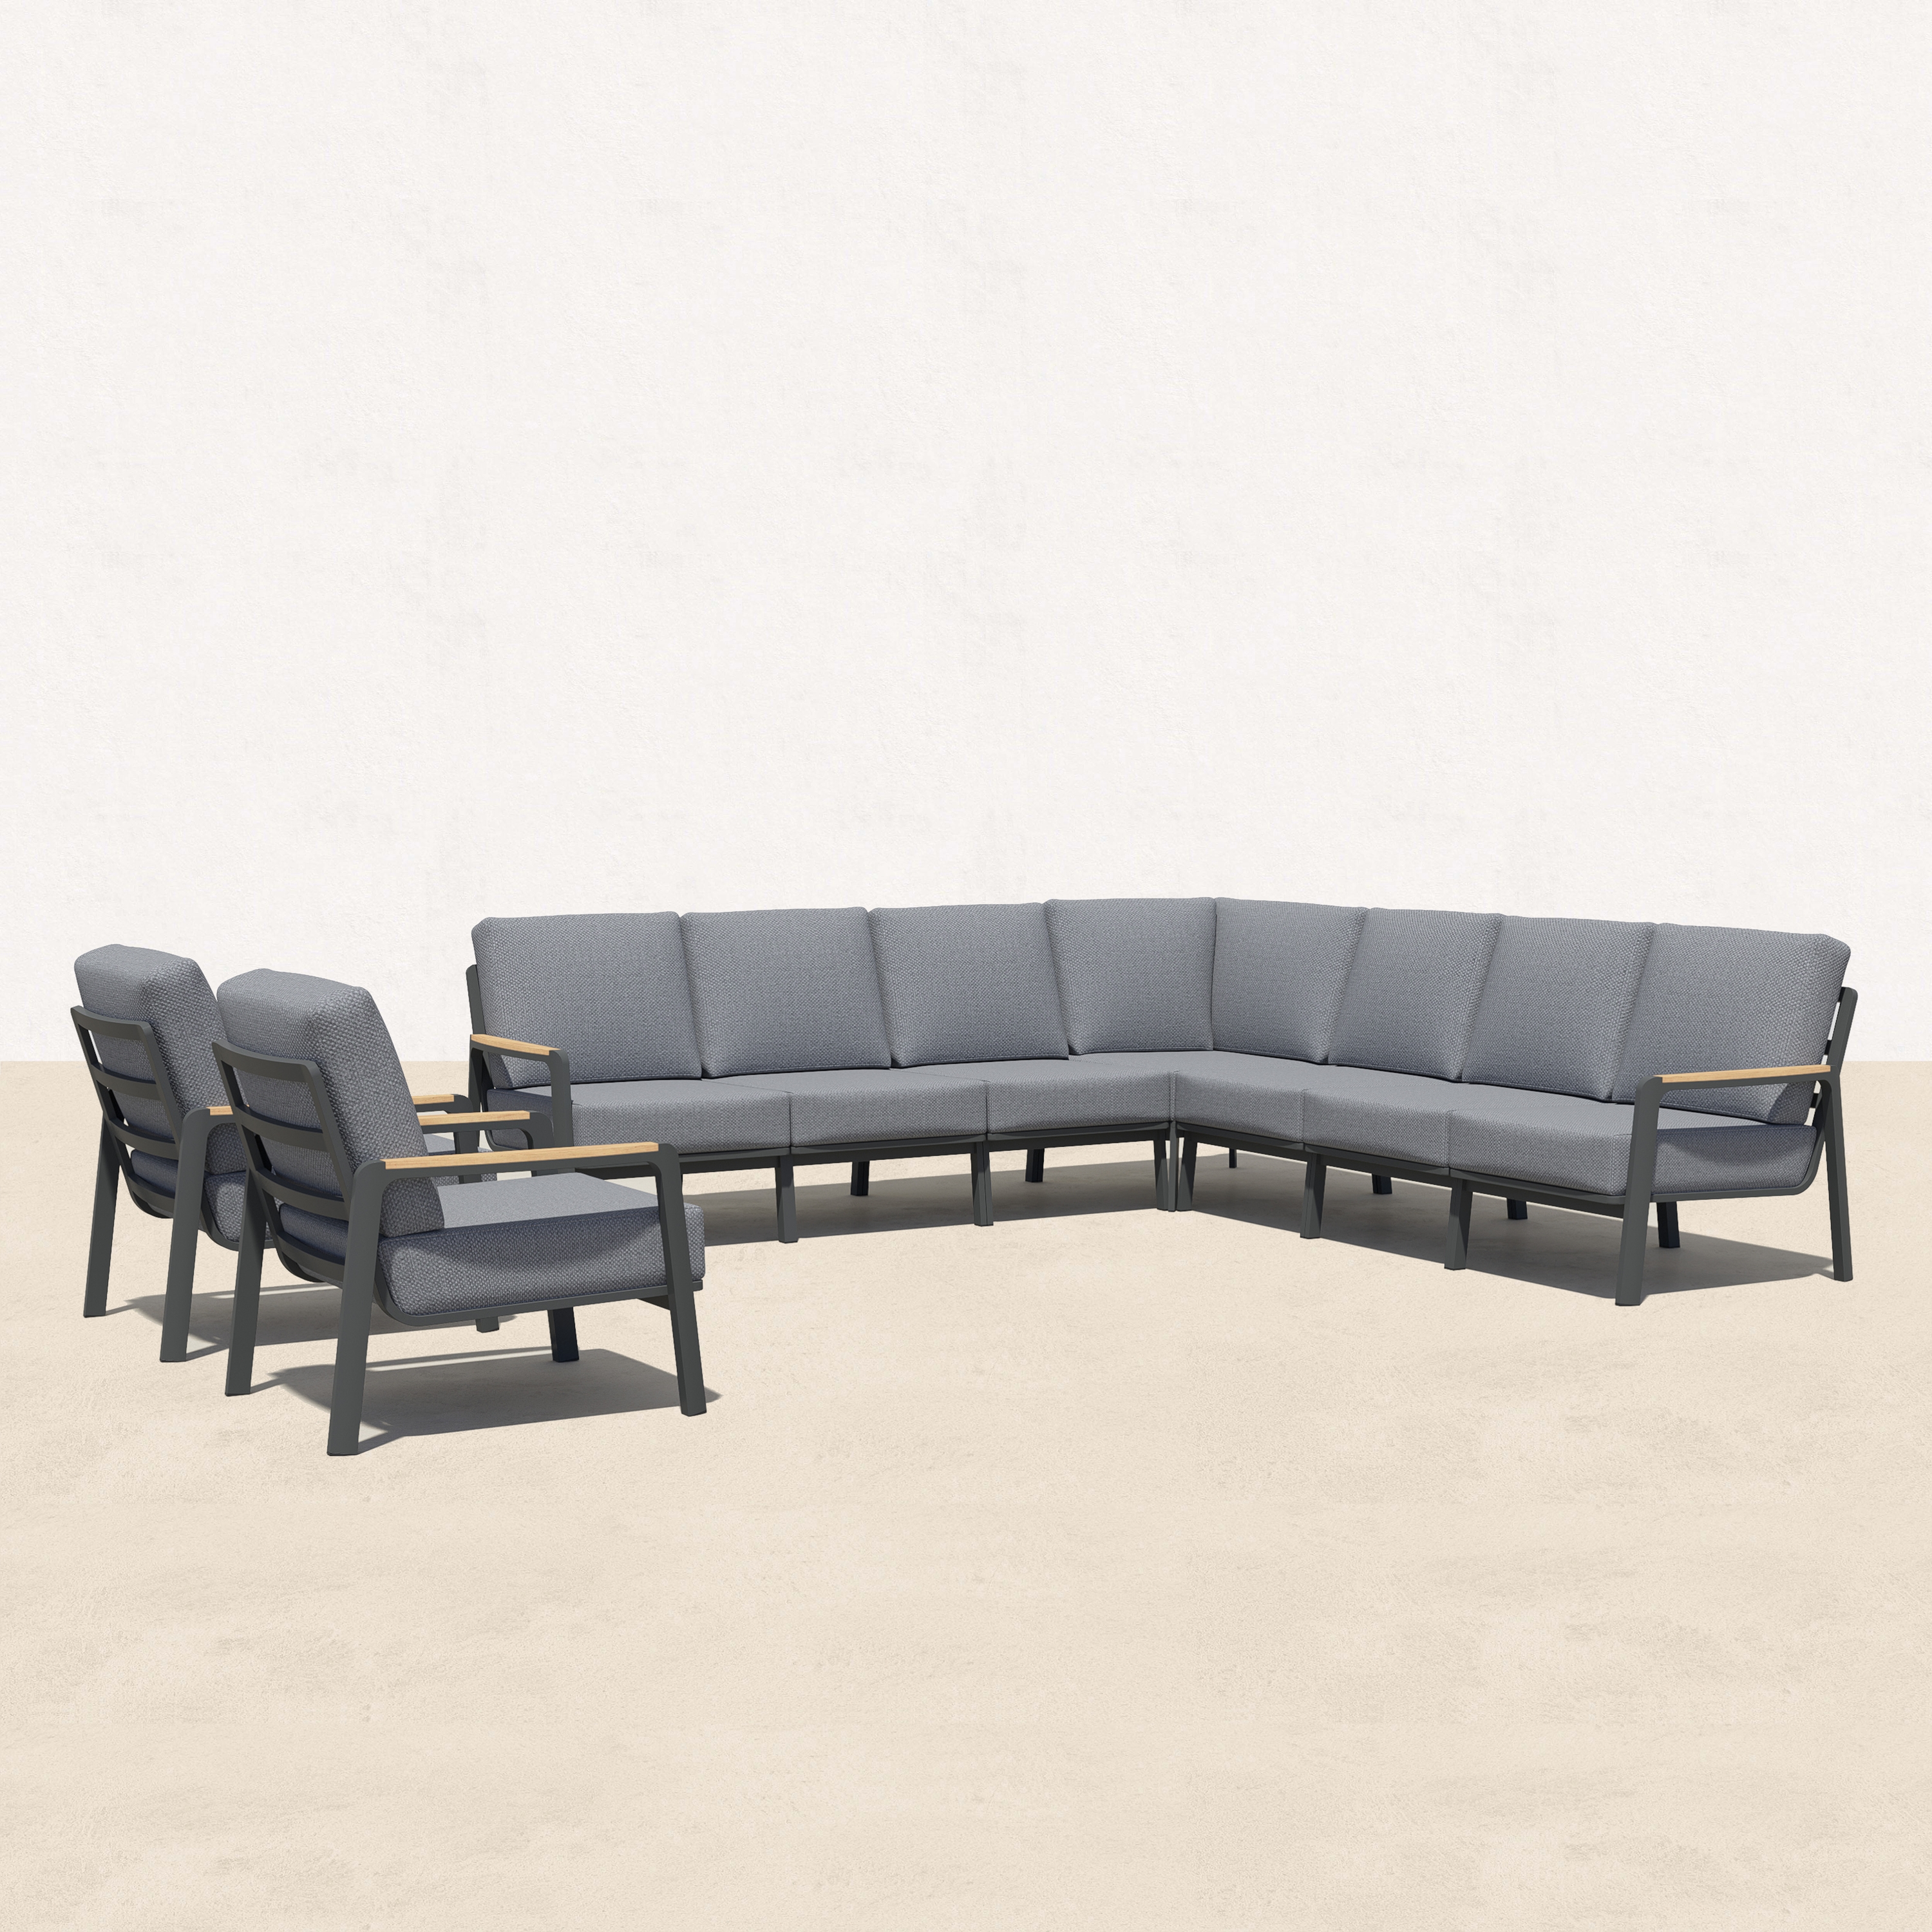 Orion Teak Patio L Sectional with Armchairs - 9 Seat -Baeryon Furniture